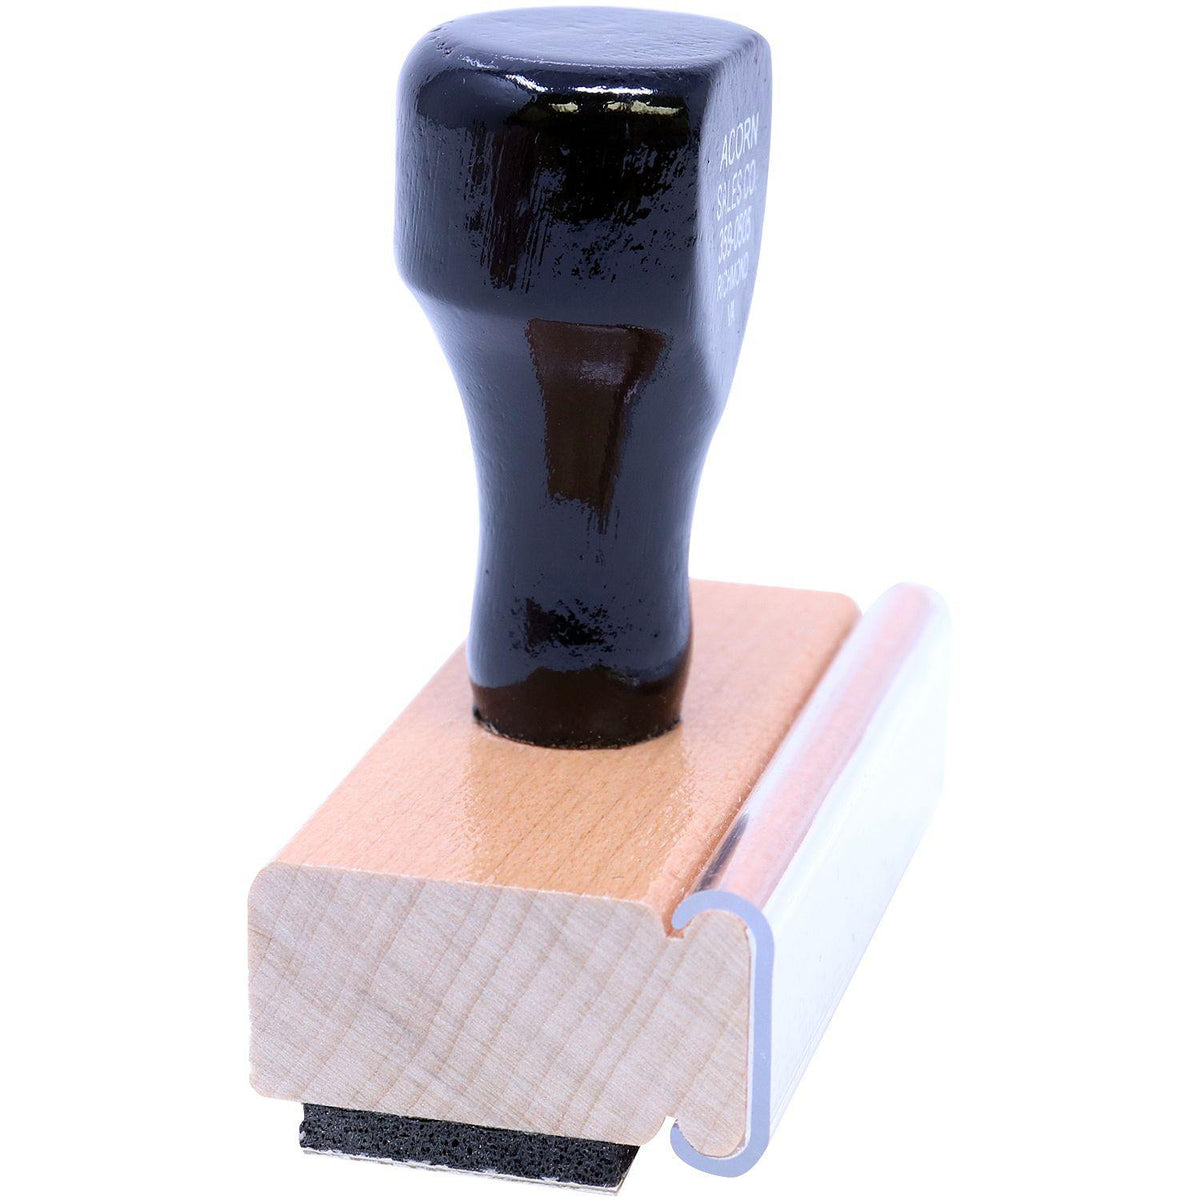 Large Your Insurance has Paid their Portion Rubber Stamp - Engineer Seal Stamps - Brand_Acorn, Impression Size_Large, Stamp Type_Regular Stamp, Type of Use_Finance, Type of Use_Legal, Type of Use_Medical Office